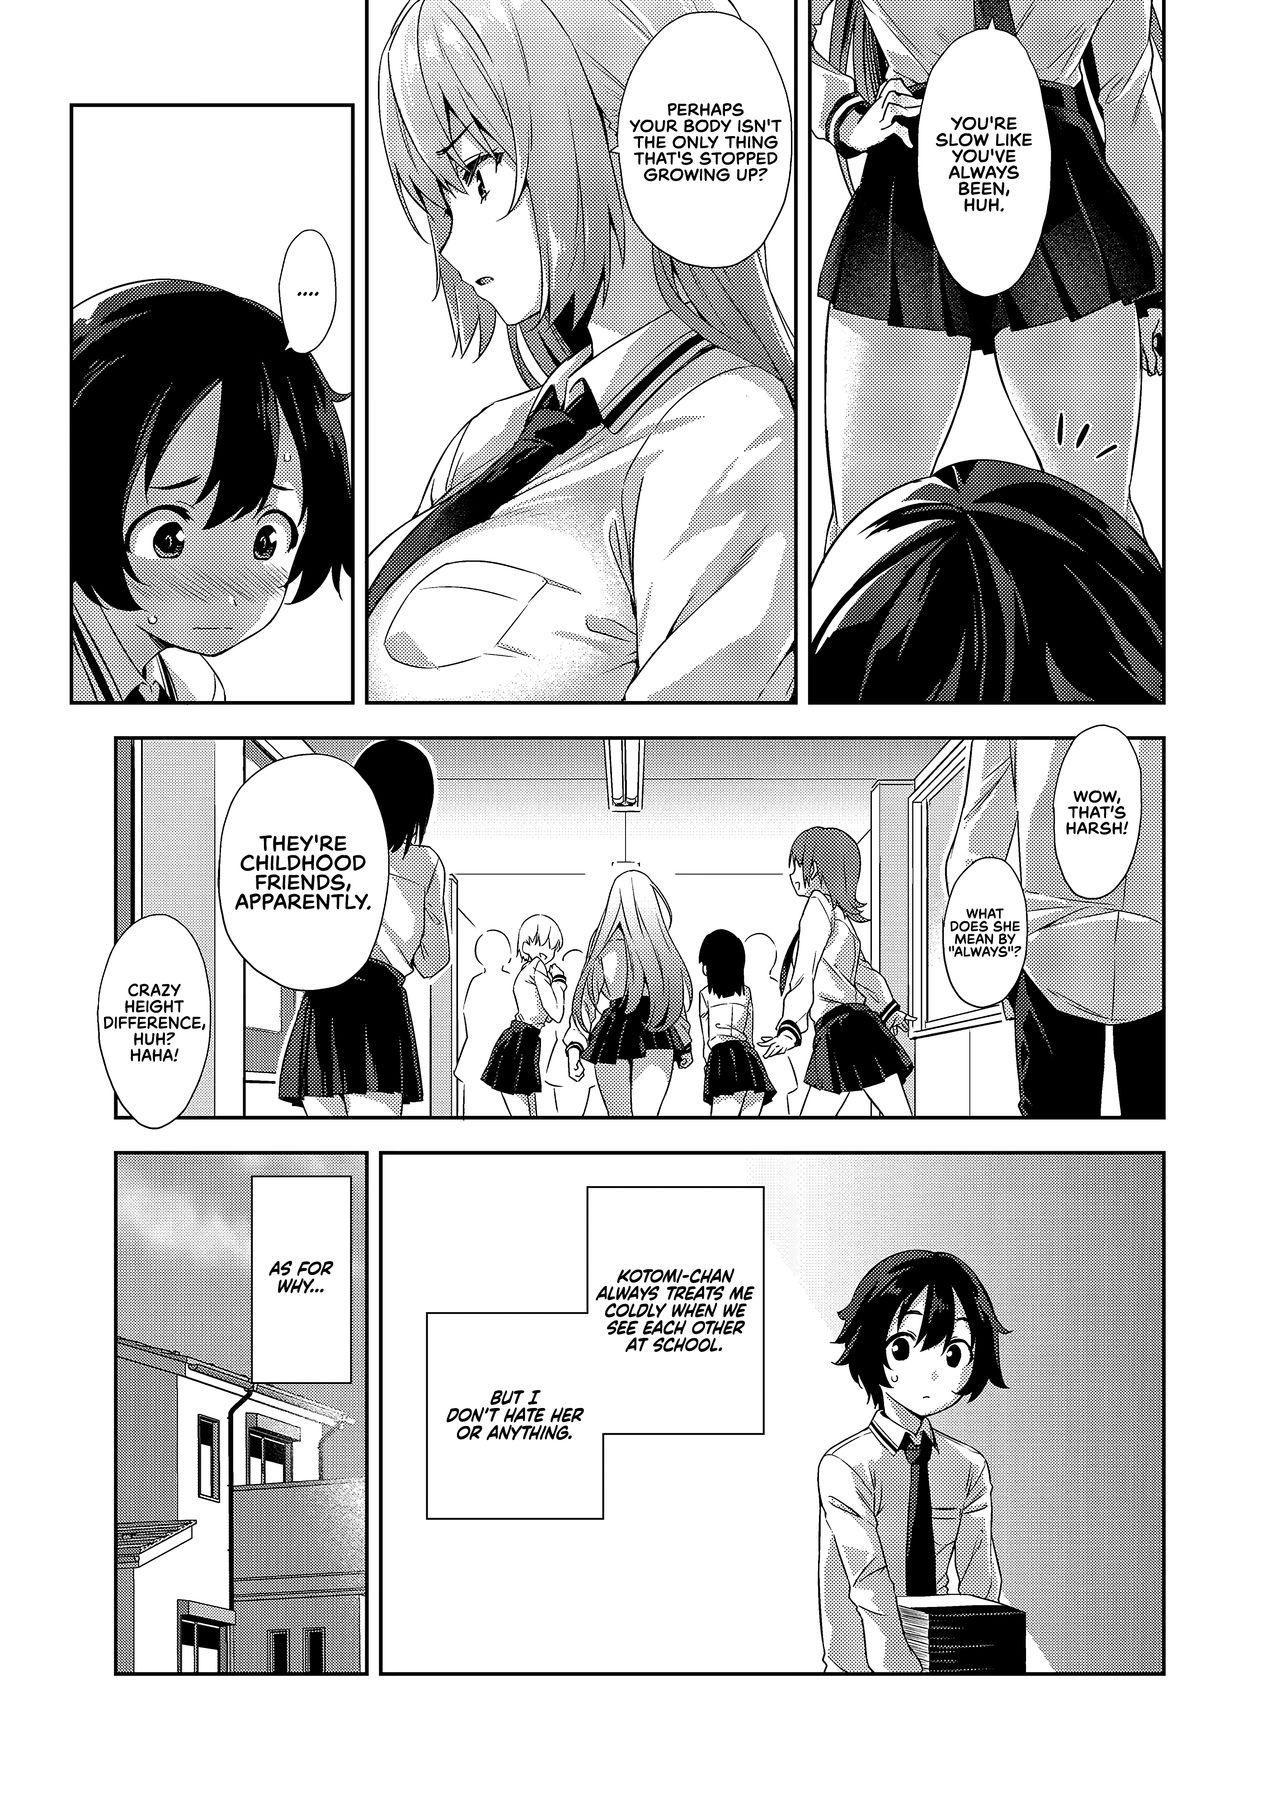 Gakkou to Bed ja Seihantai no, Okkina Kanojo. | My Big Girlfriend Acts the Polar Opposite in Bed and at School. 6